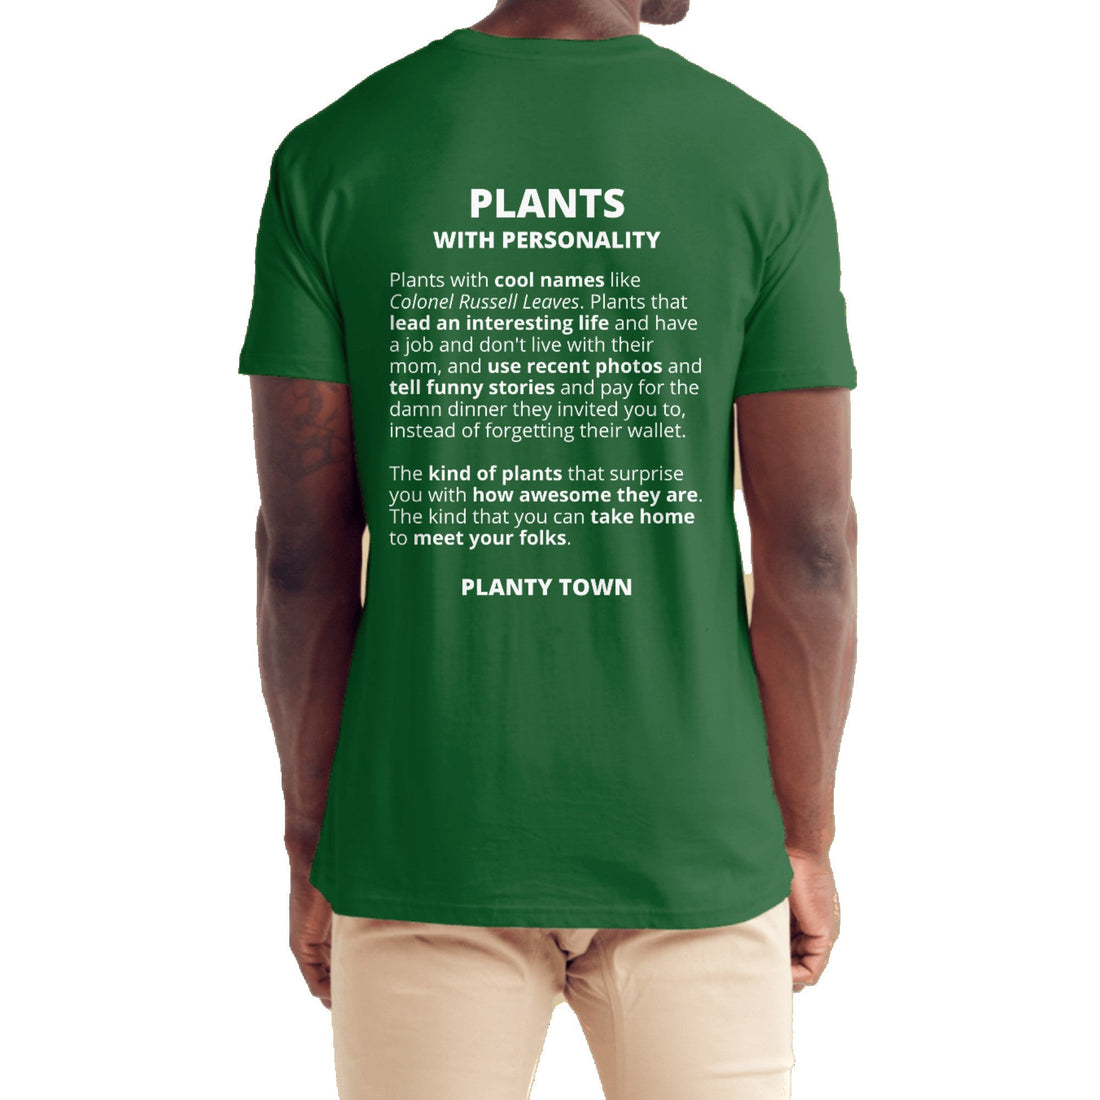 Mayor of Planty Town - T-Shirt